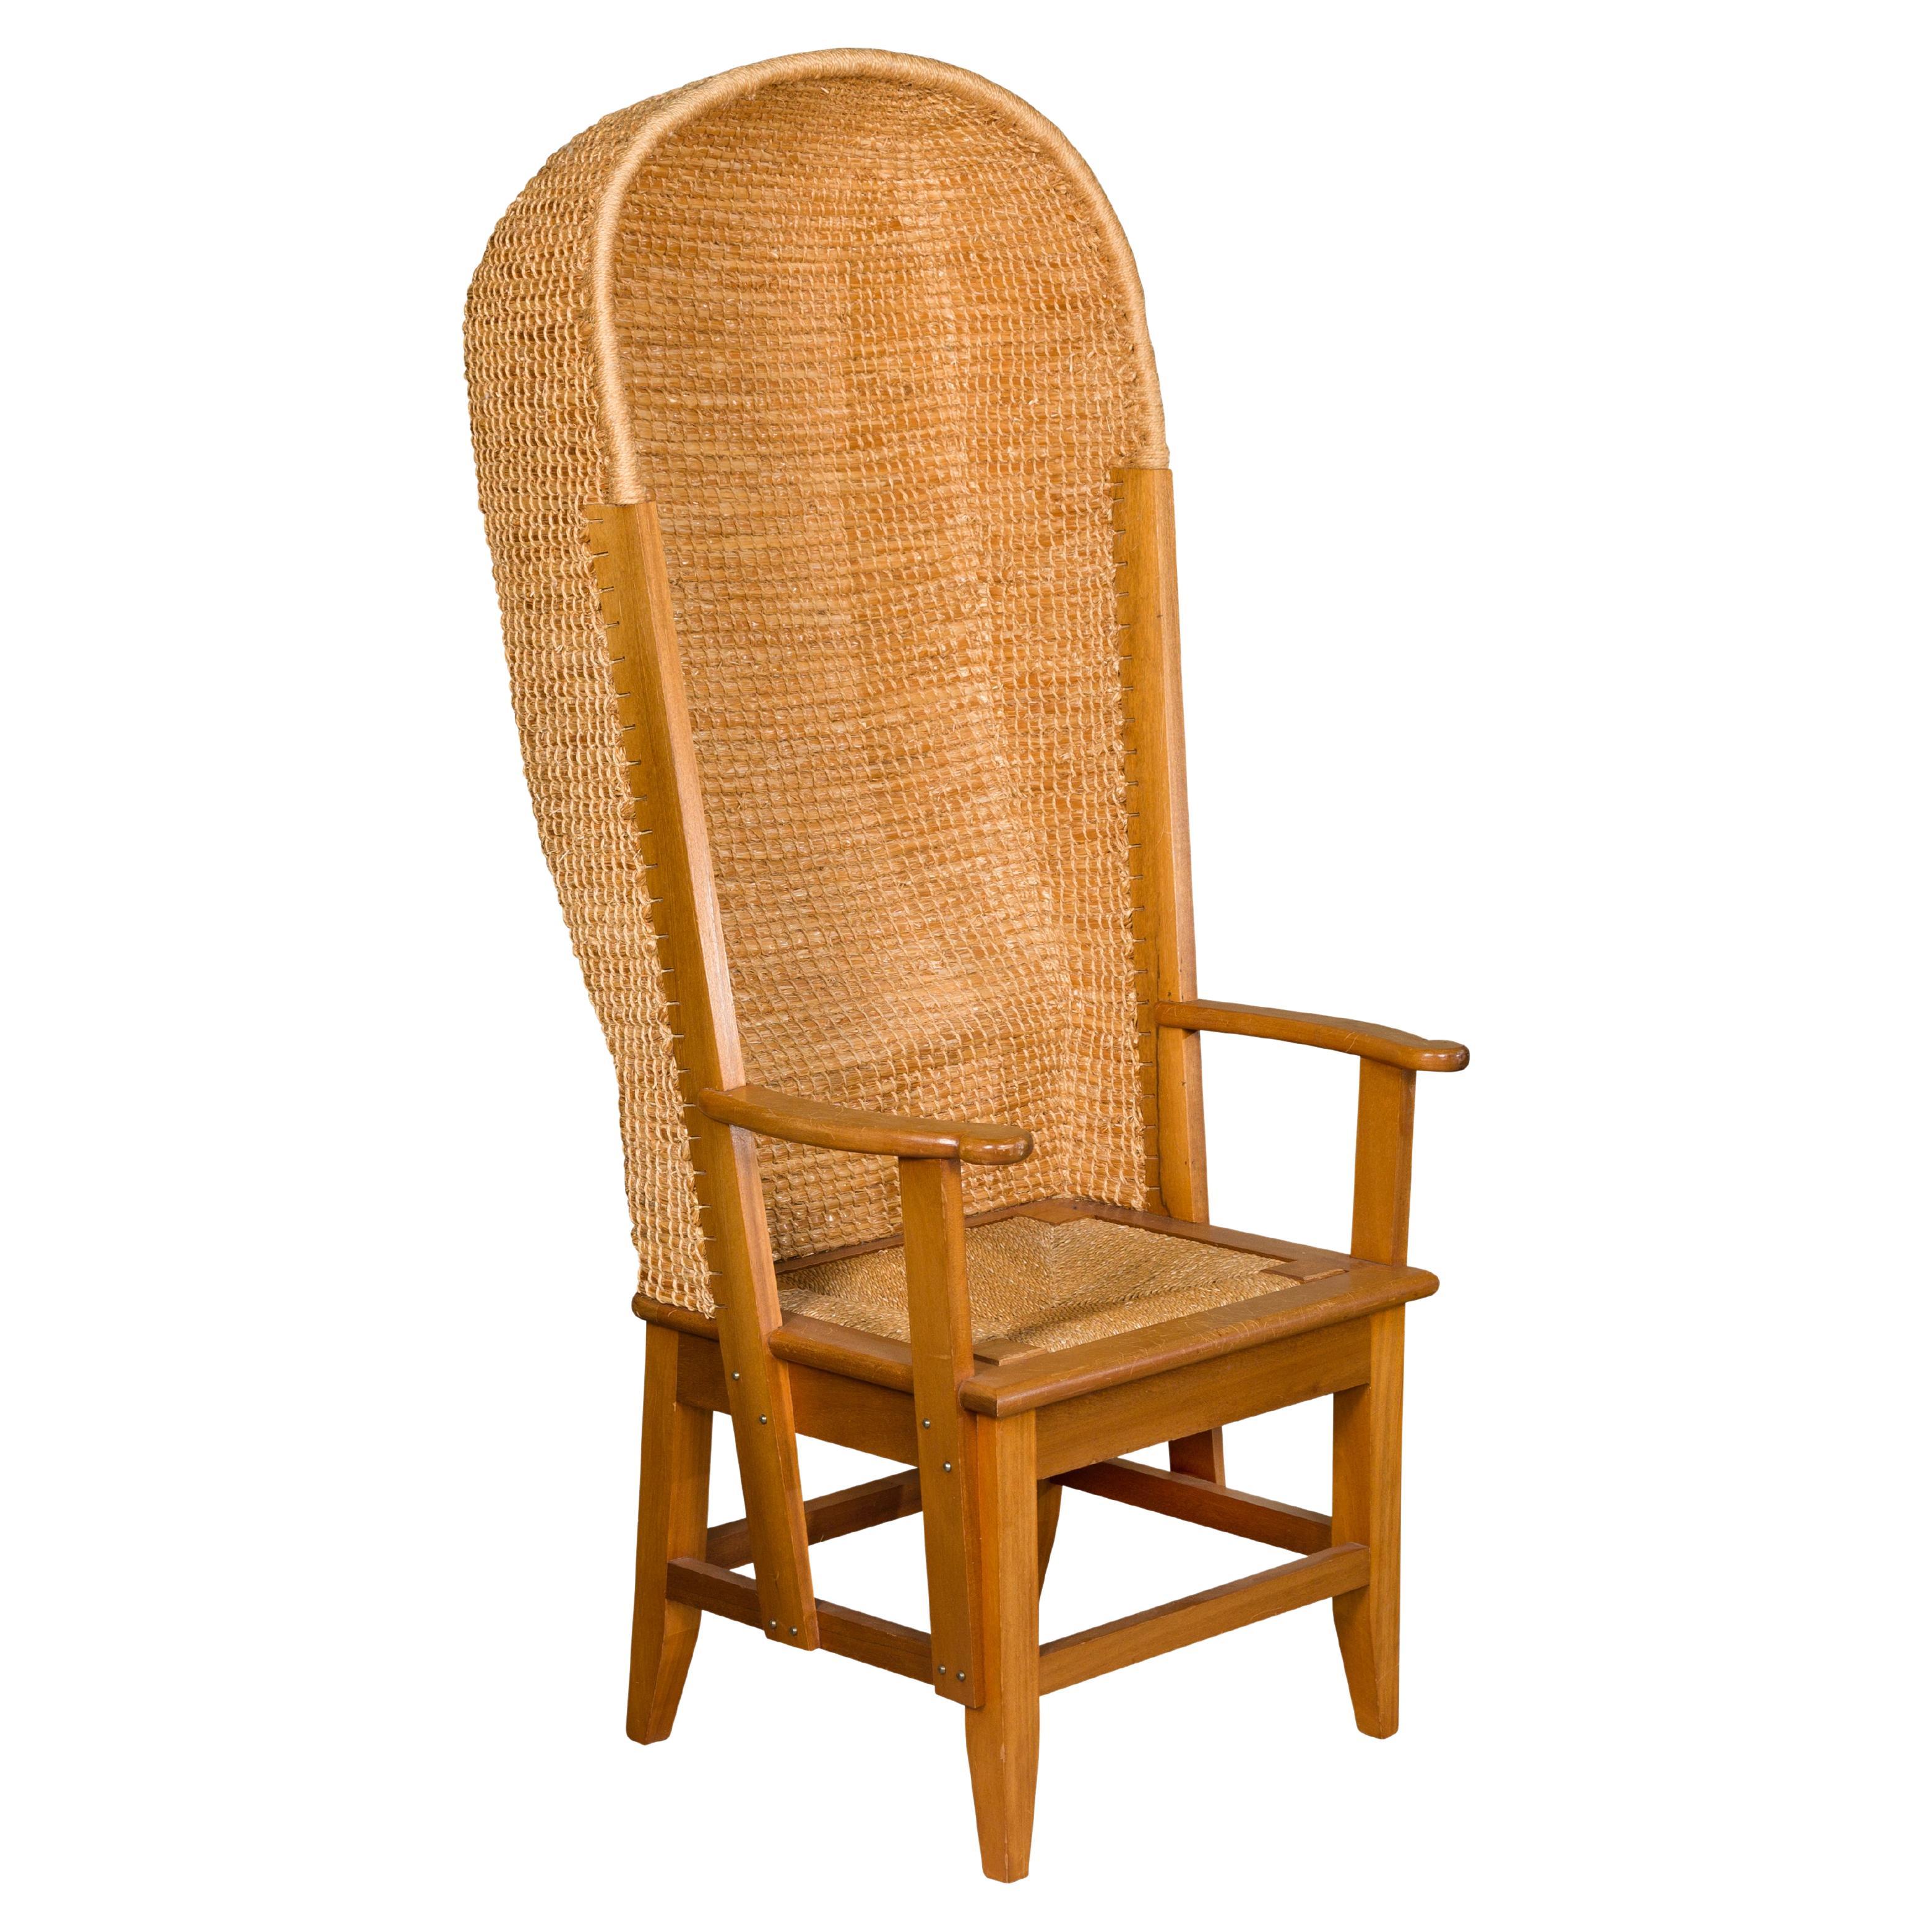 What is a lambing chair used for?